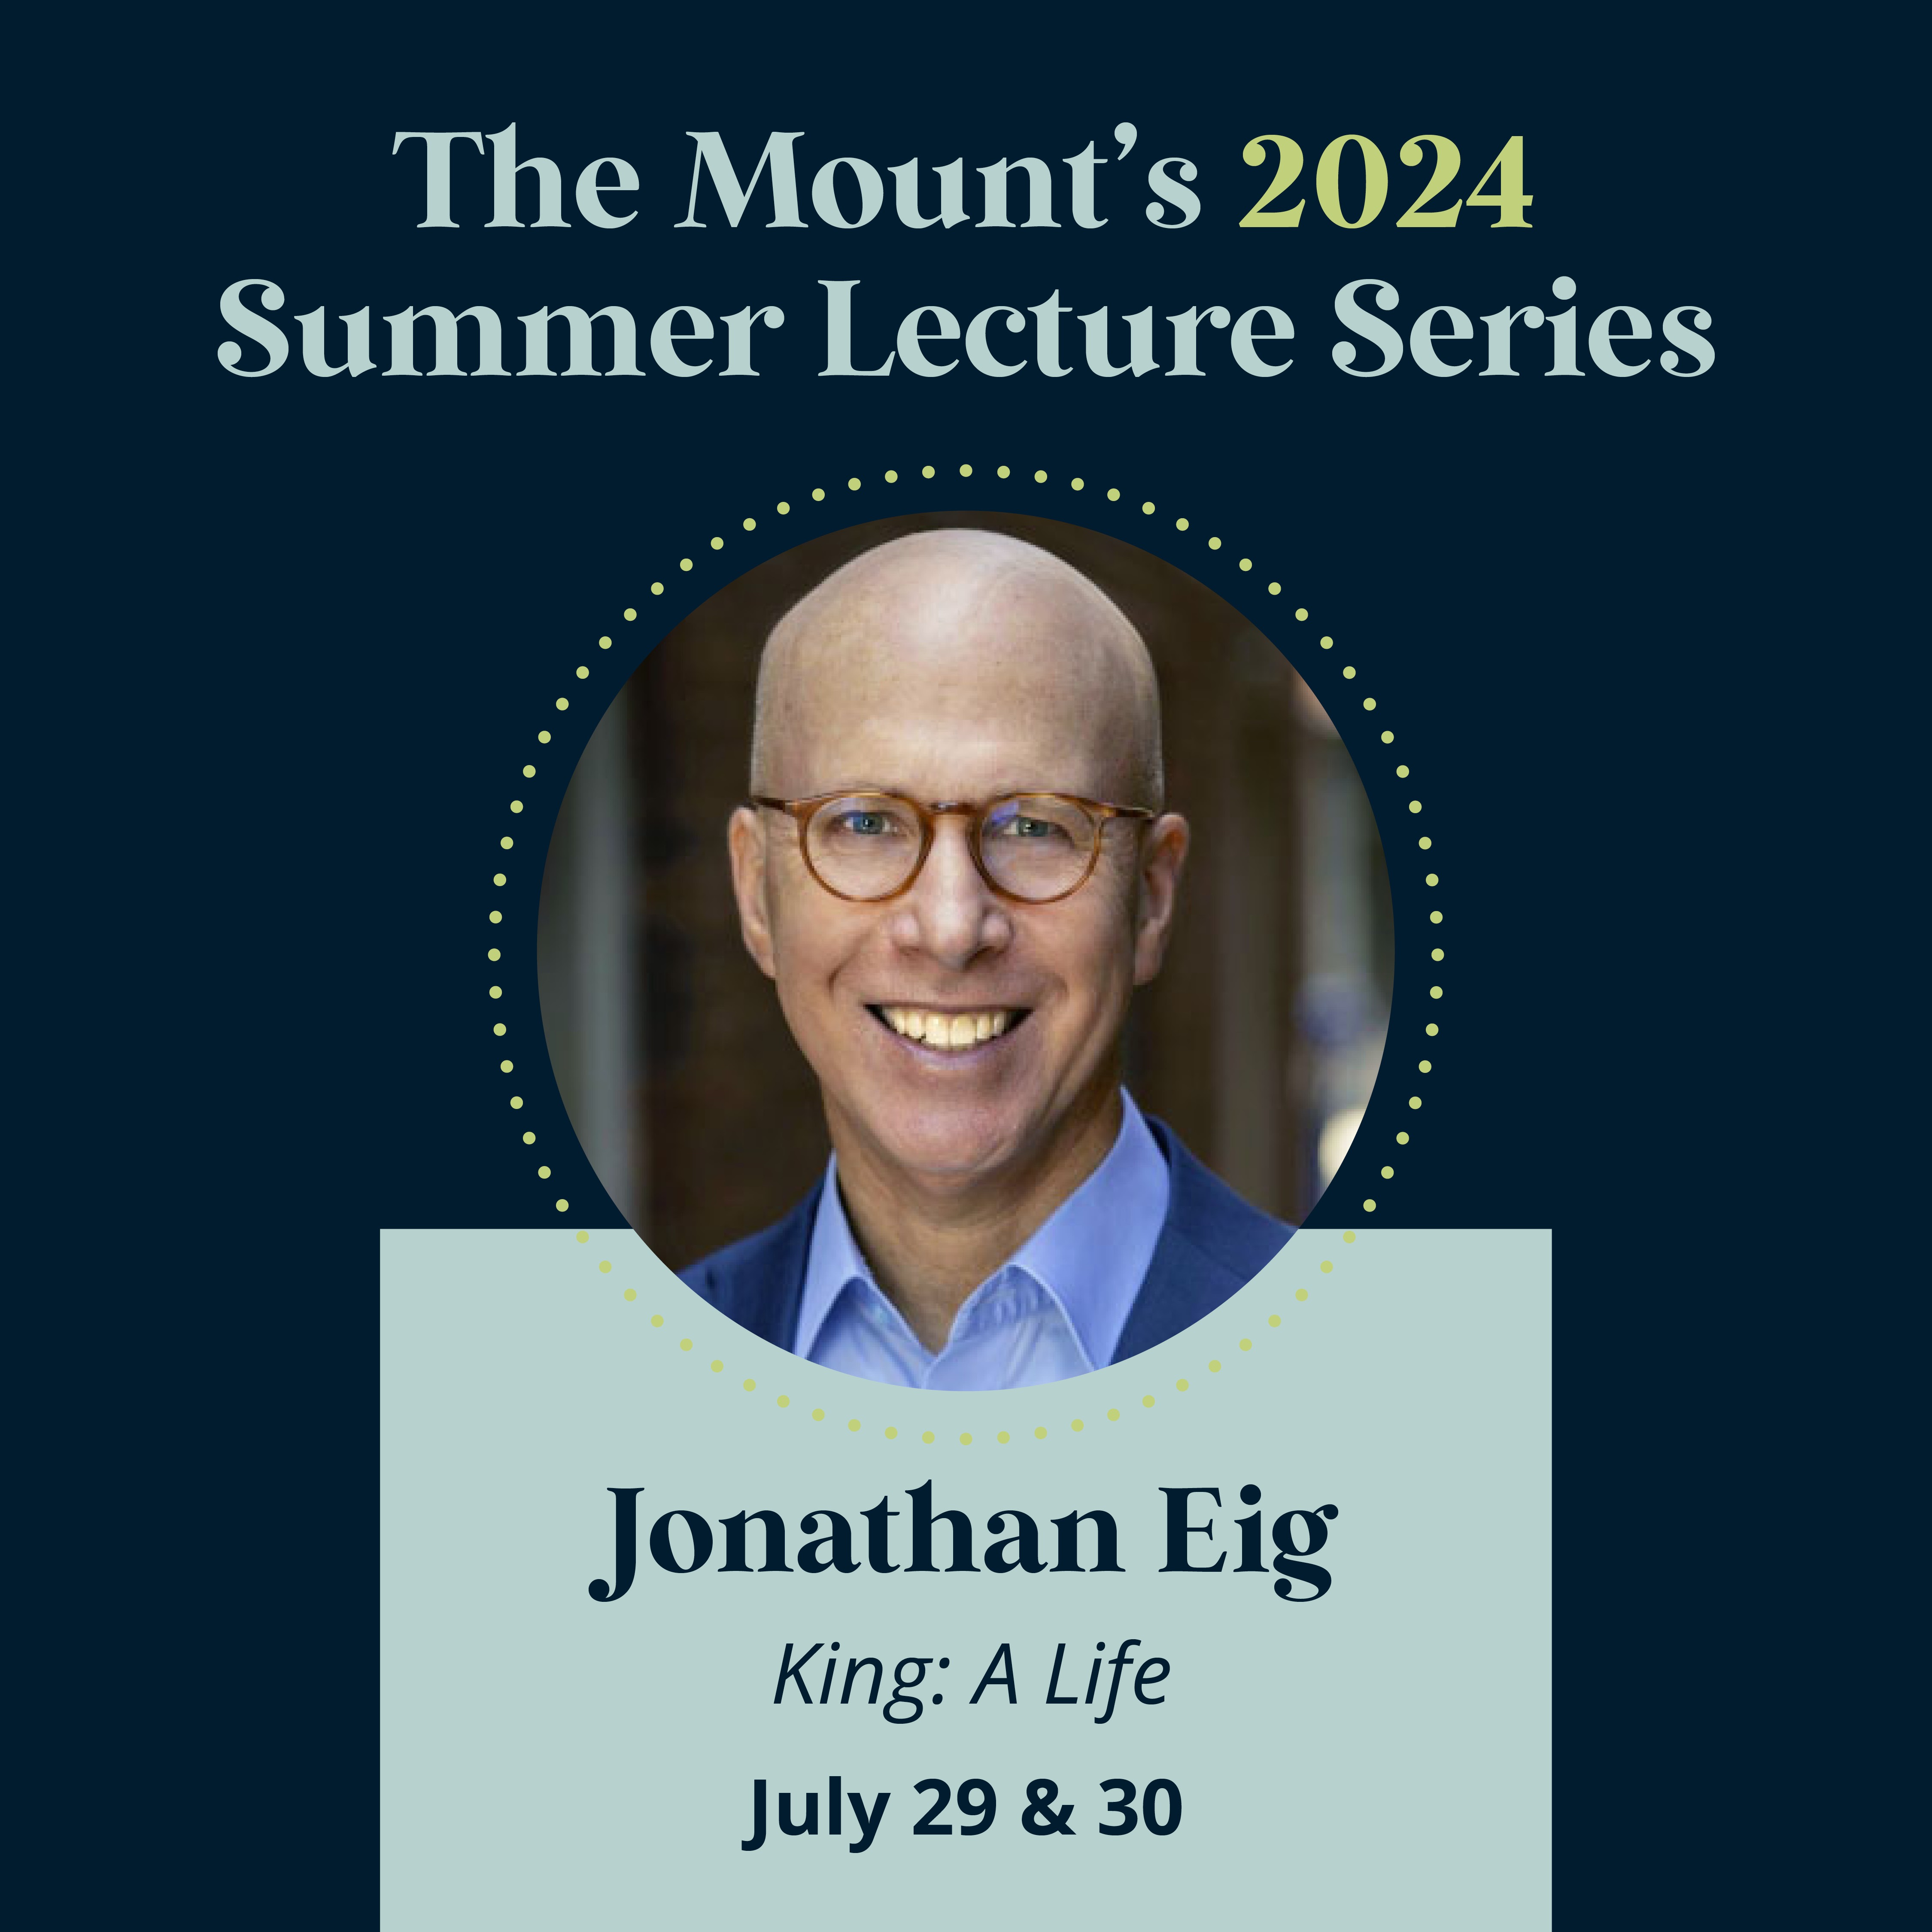 Monday lecture with Jonathan Eig